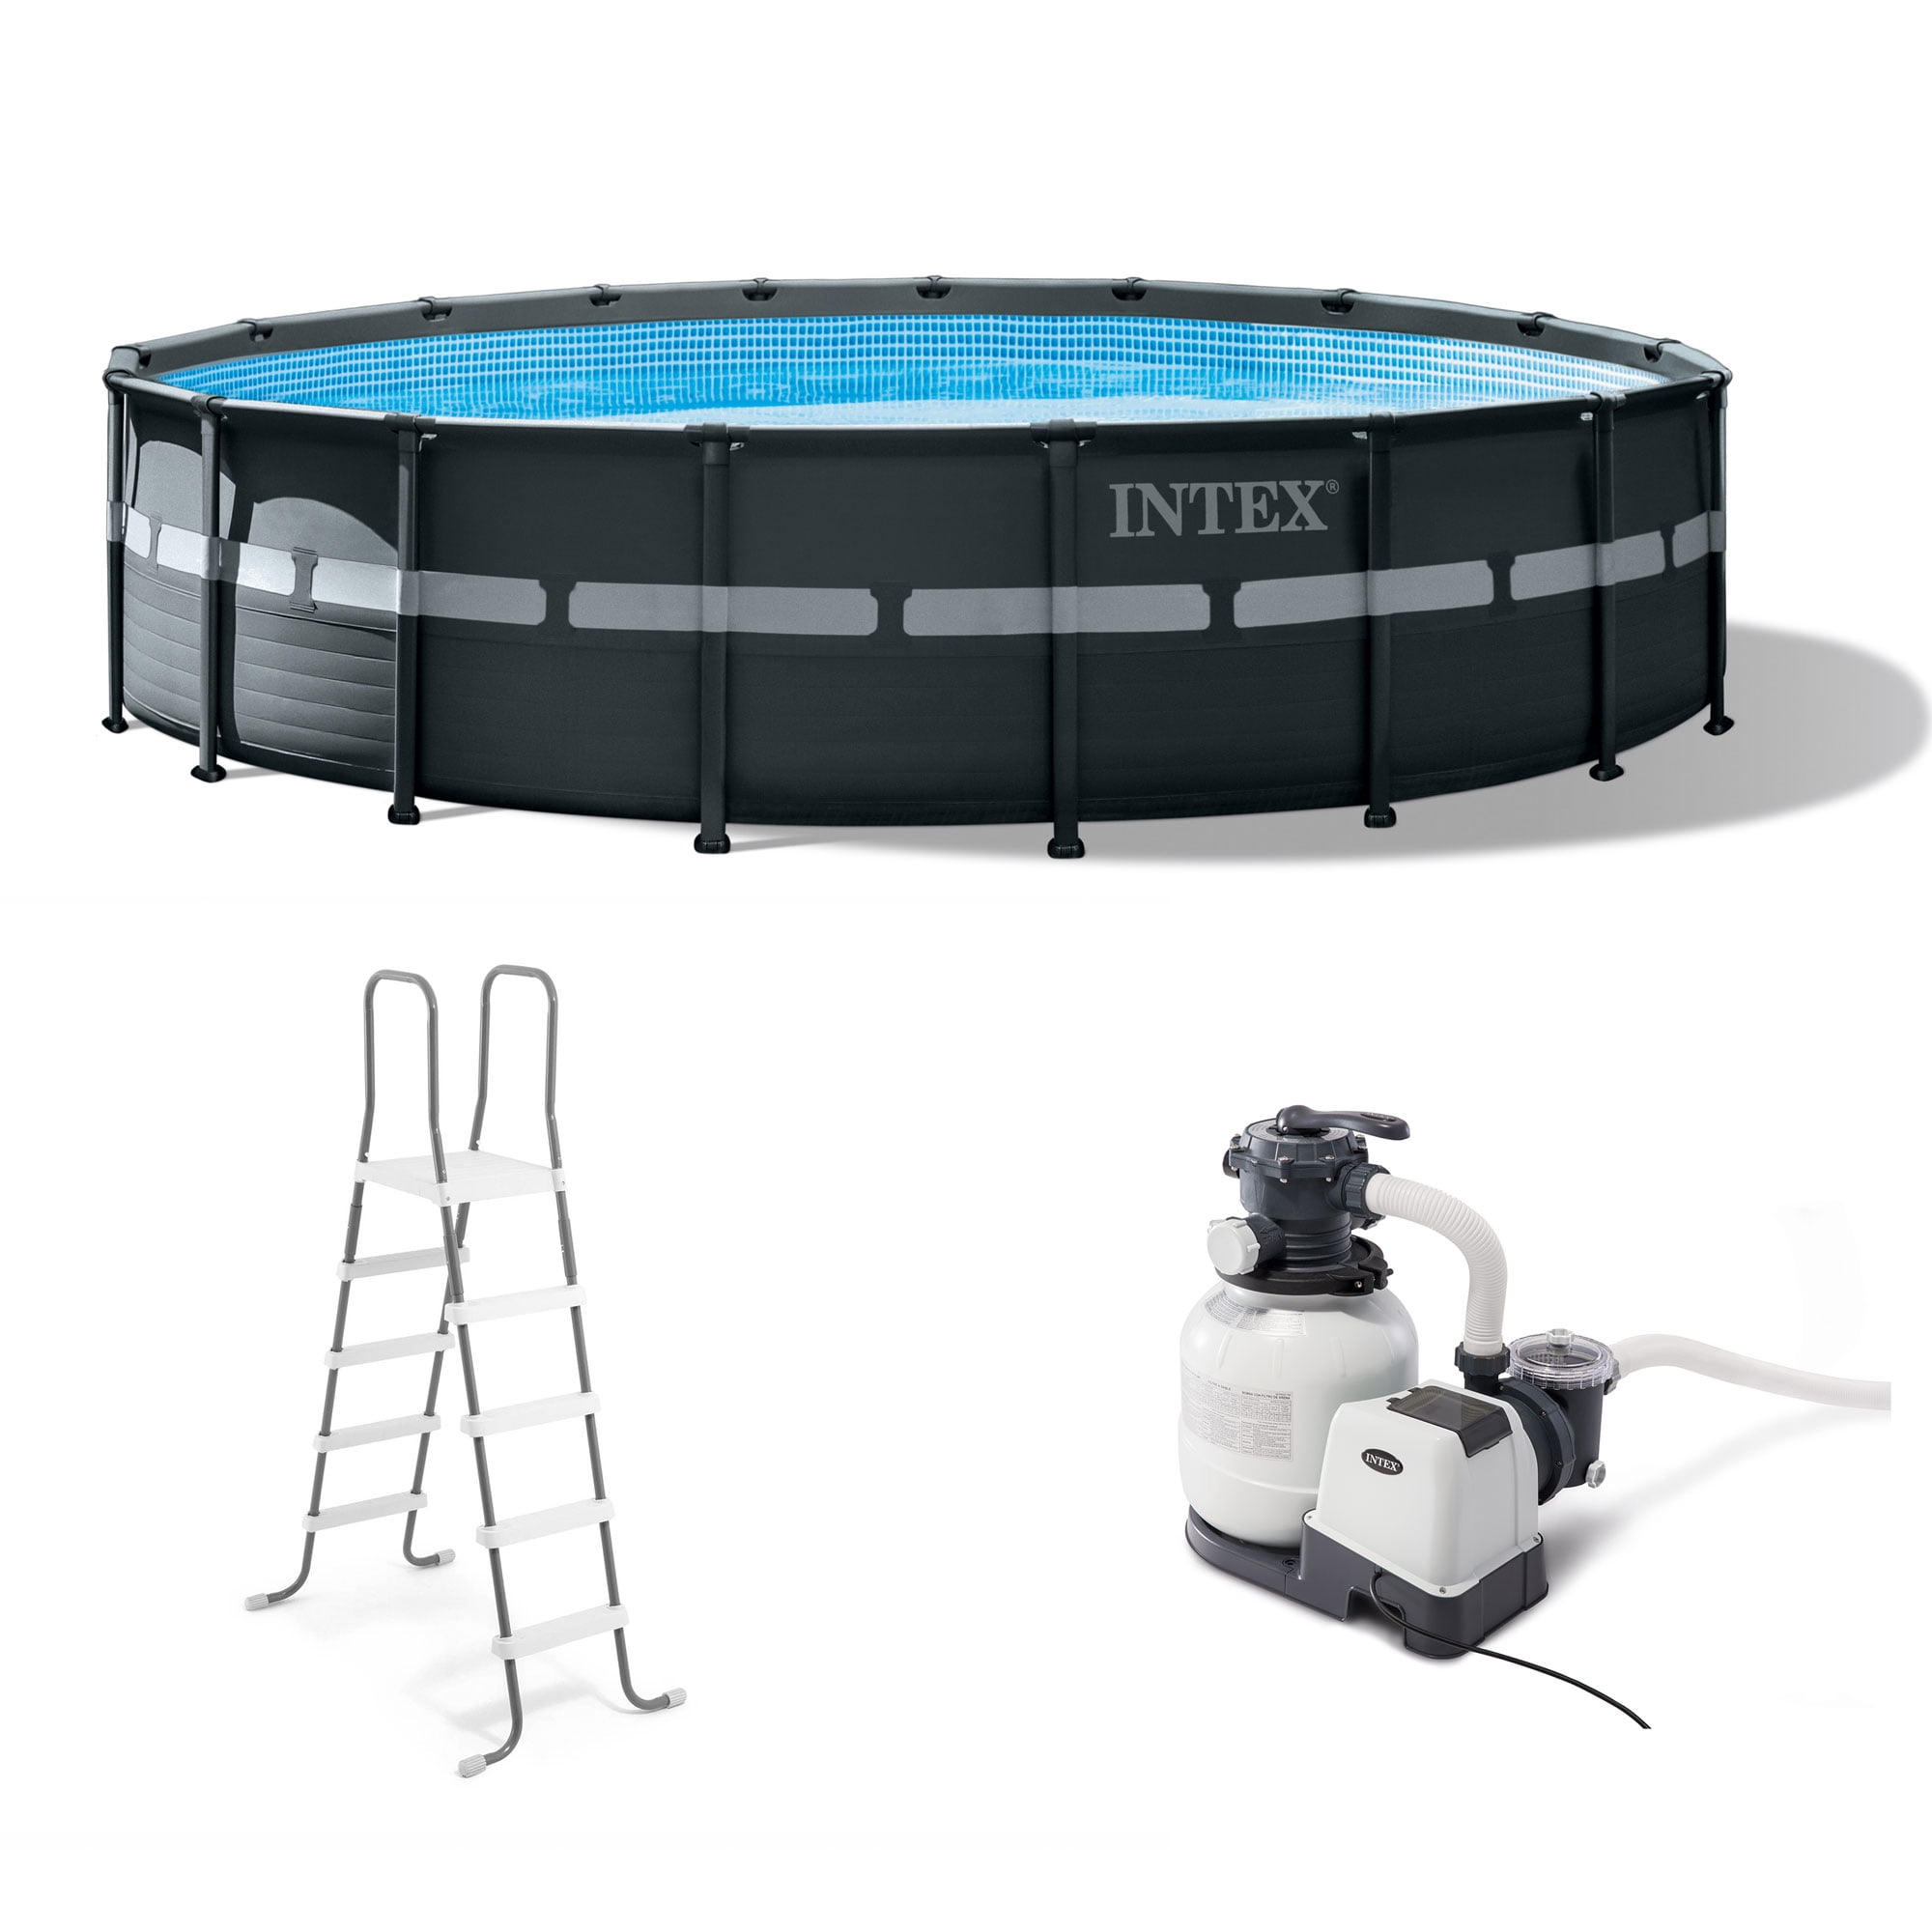 Intex 18' x 48" Inflatable Above Ground Swimming Pool w/ Ladder & Pump Open Box 